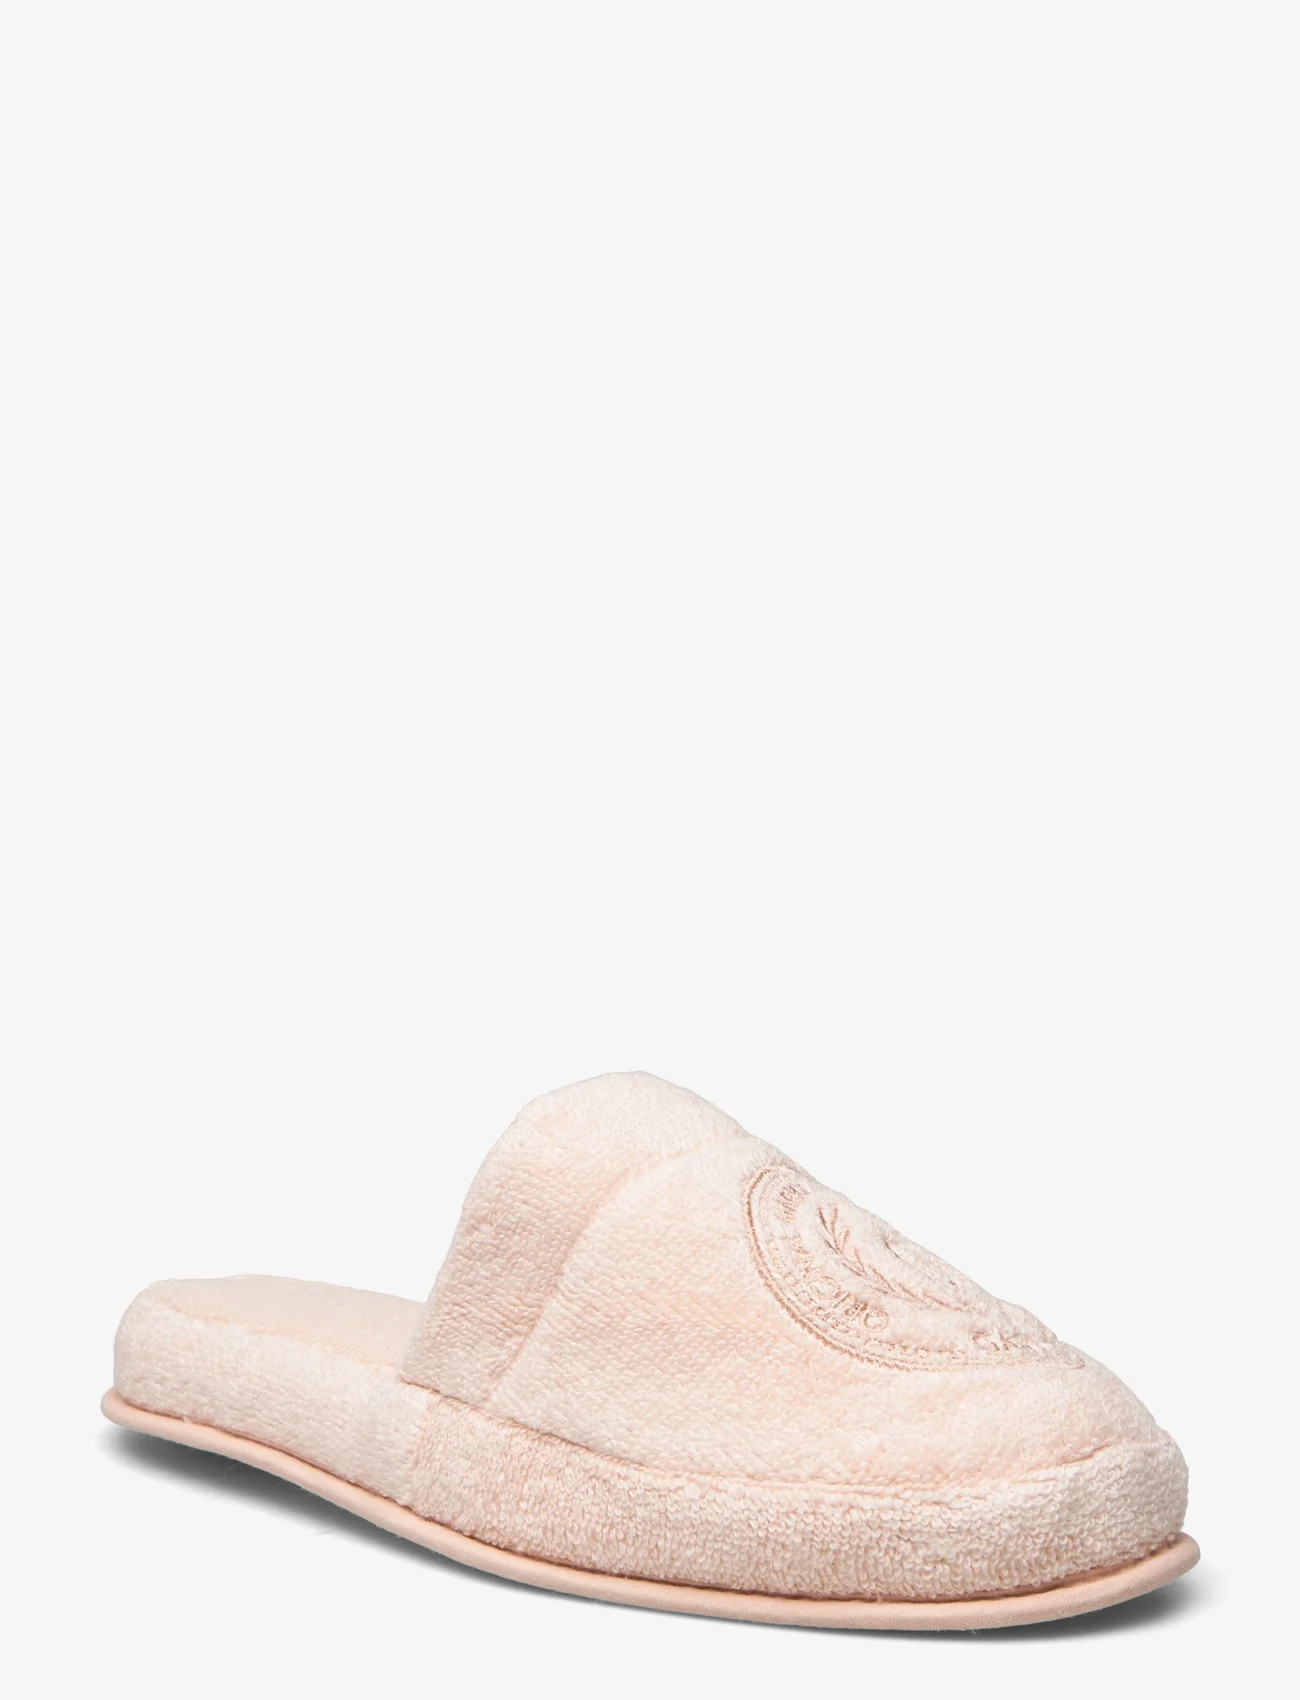 GANT - CREST SLIPPERS - apricot shade - 0